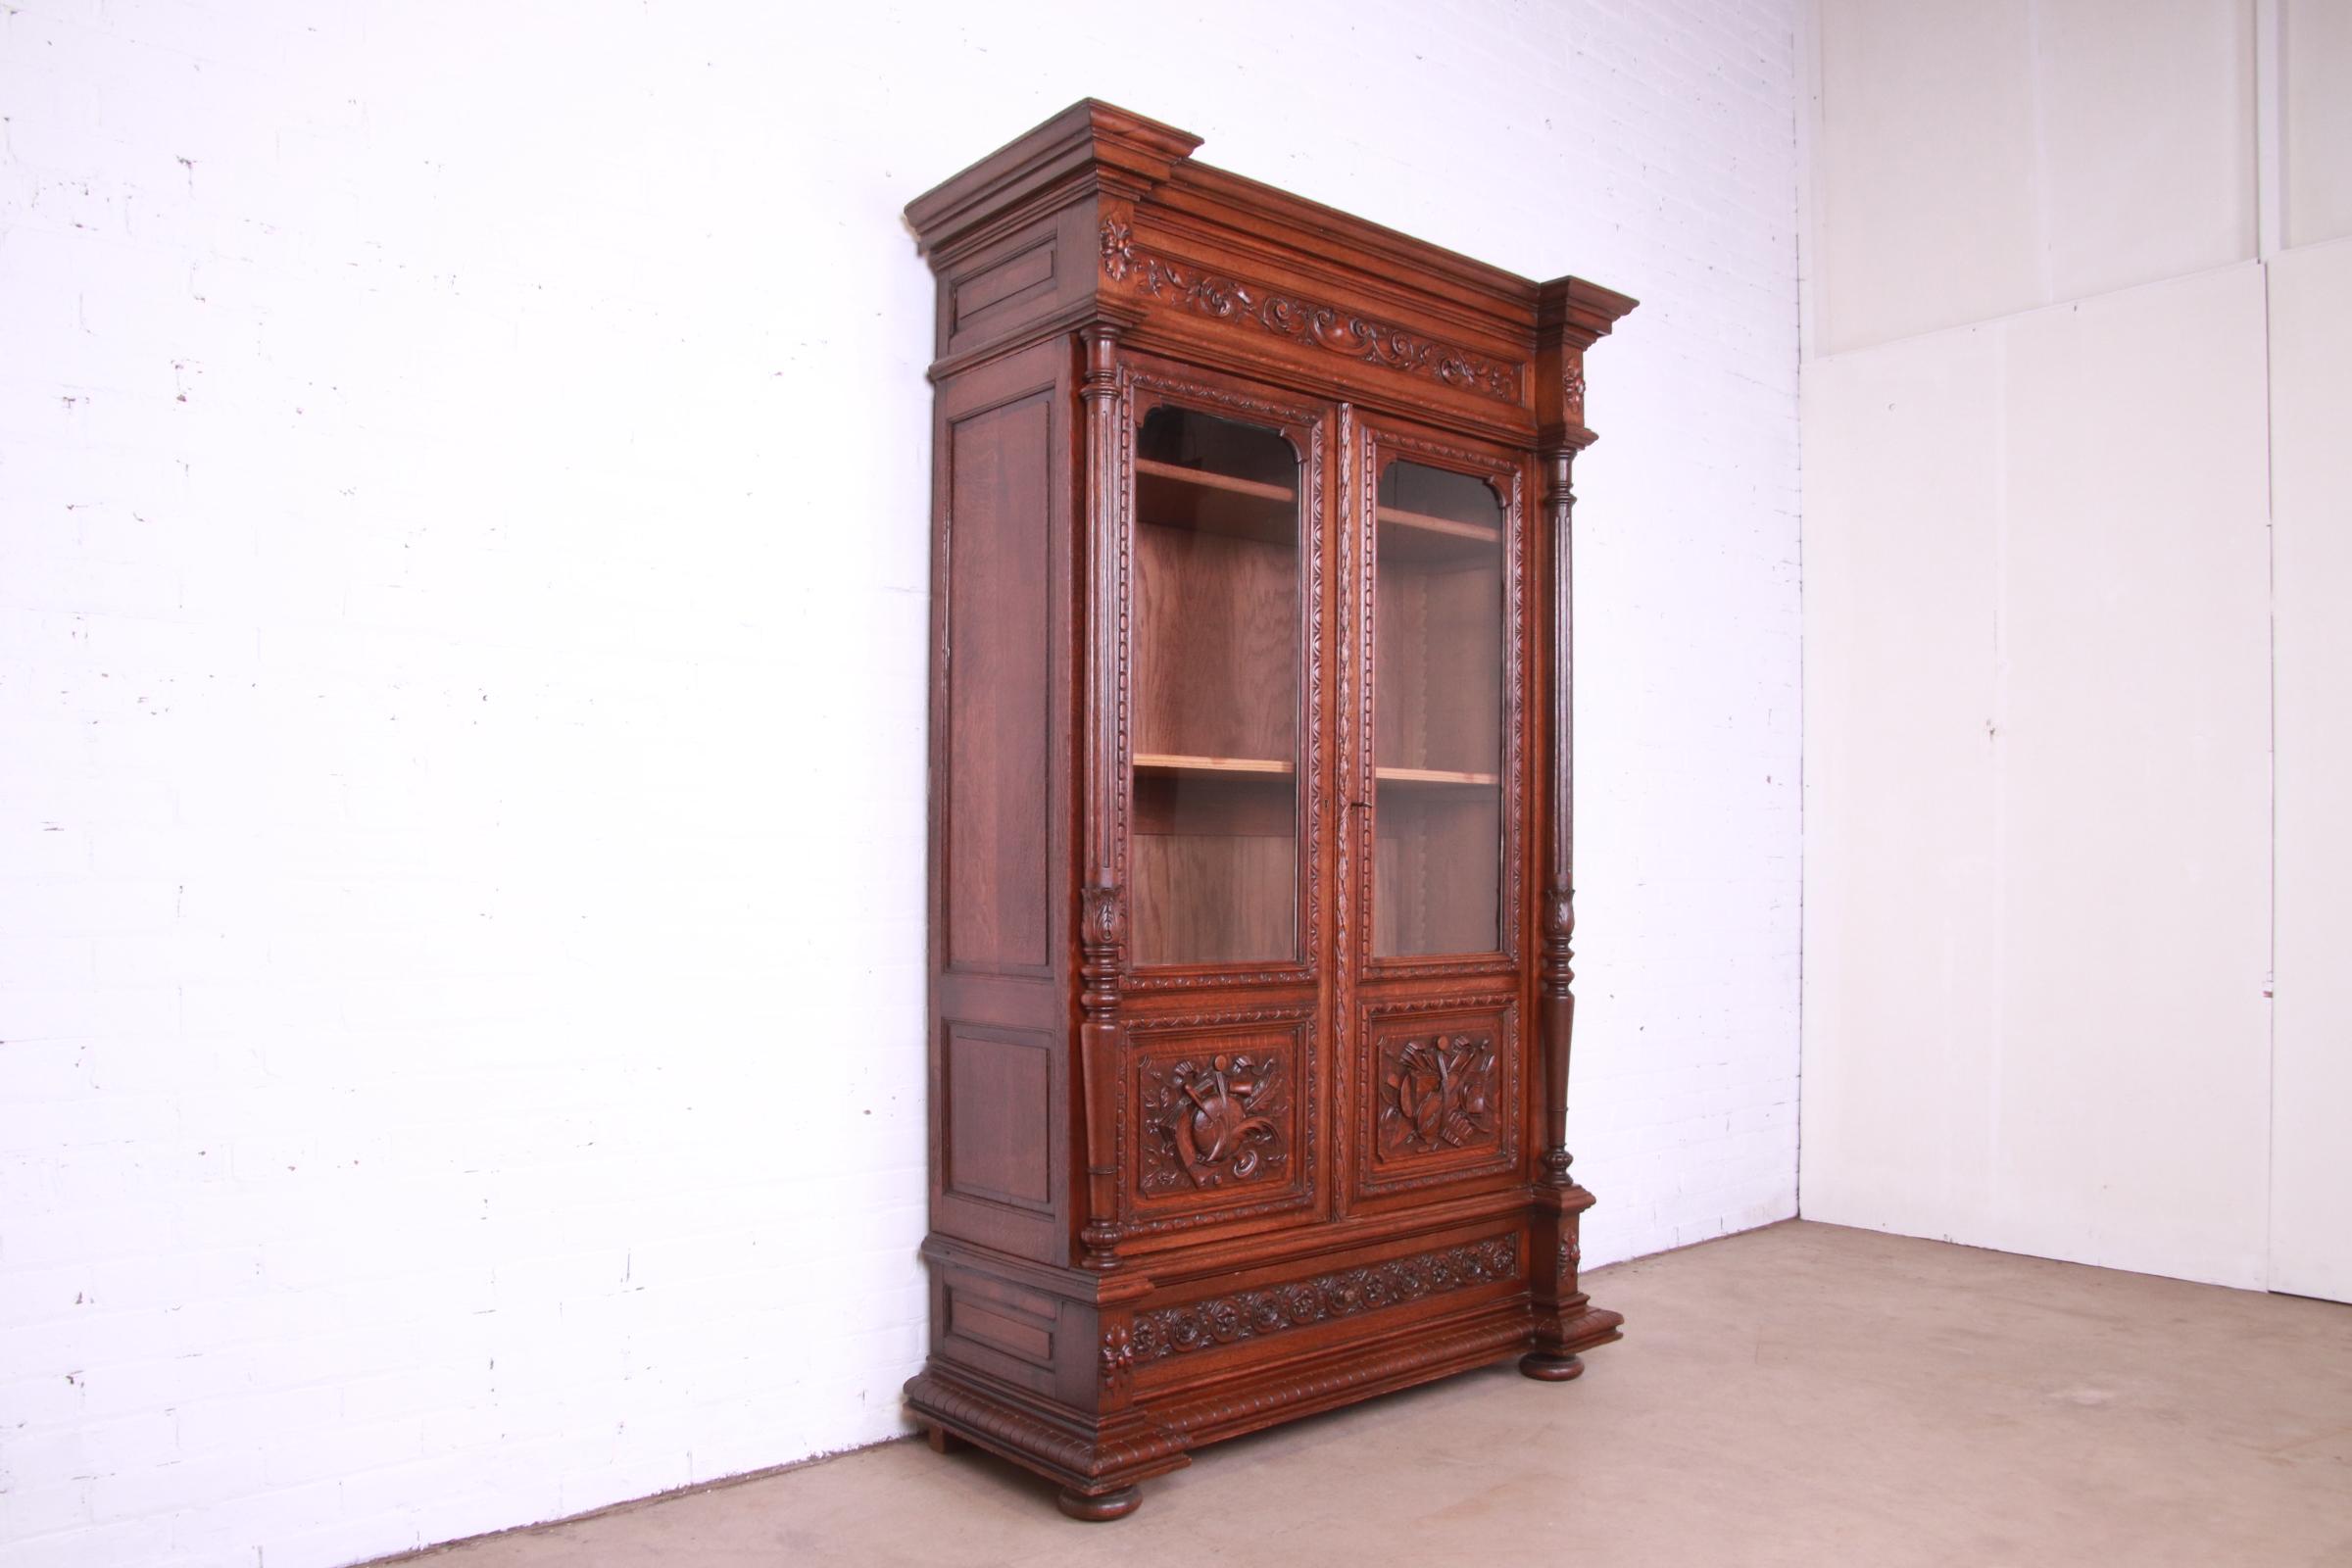 Glass Antique French Renaissance Revival Carved Oak Bibliotheque Bookcase Cabinet